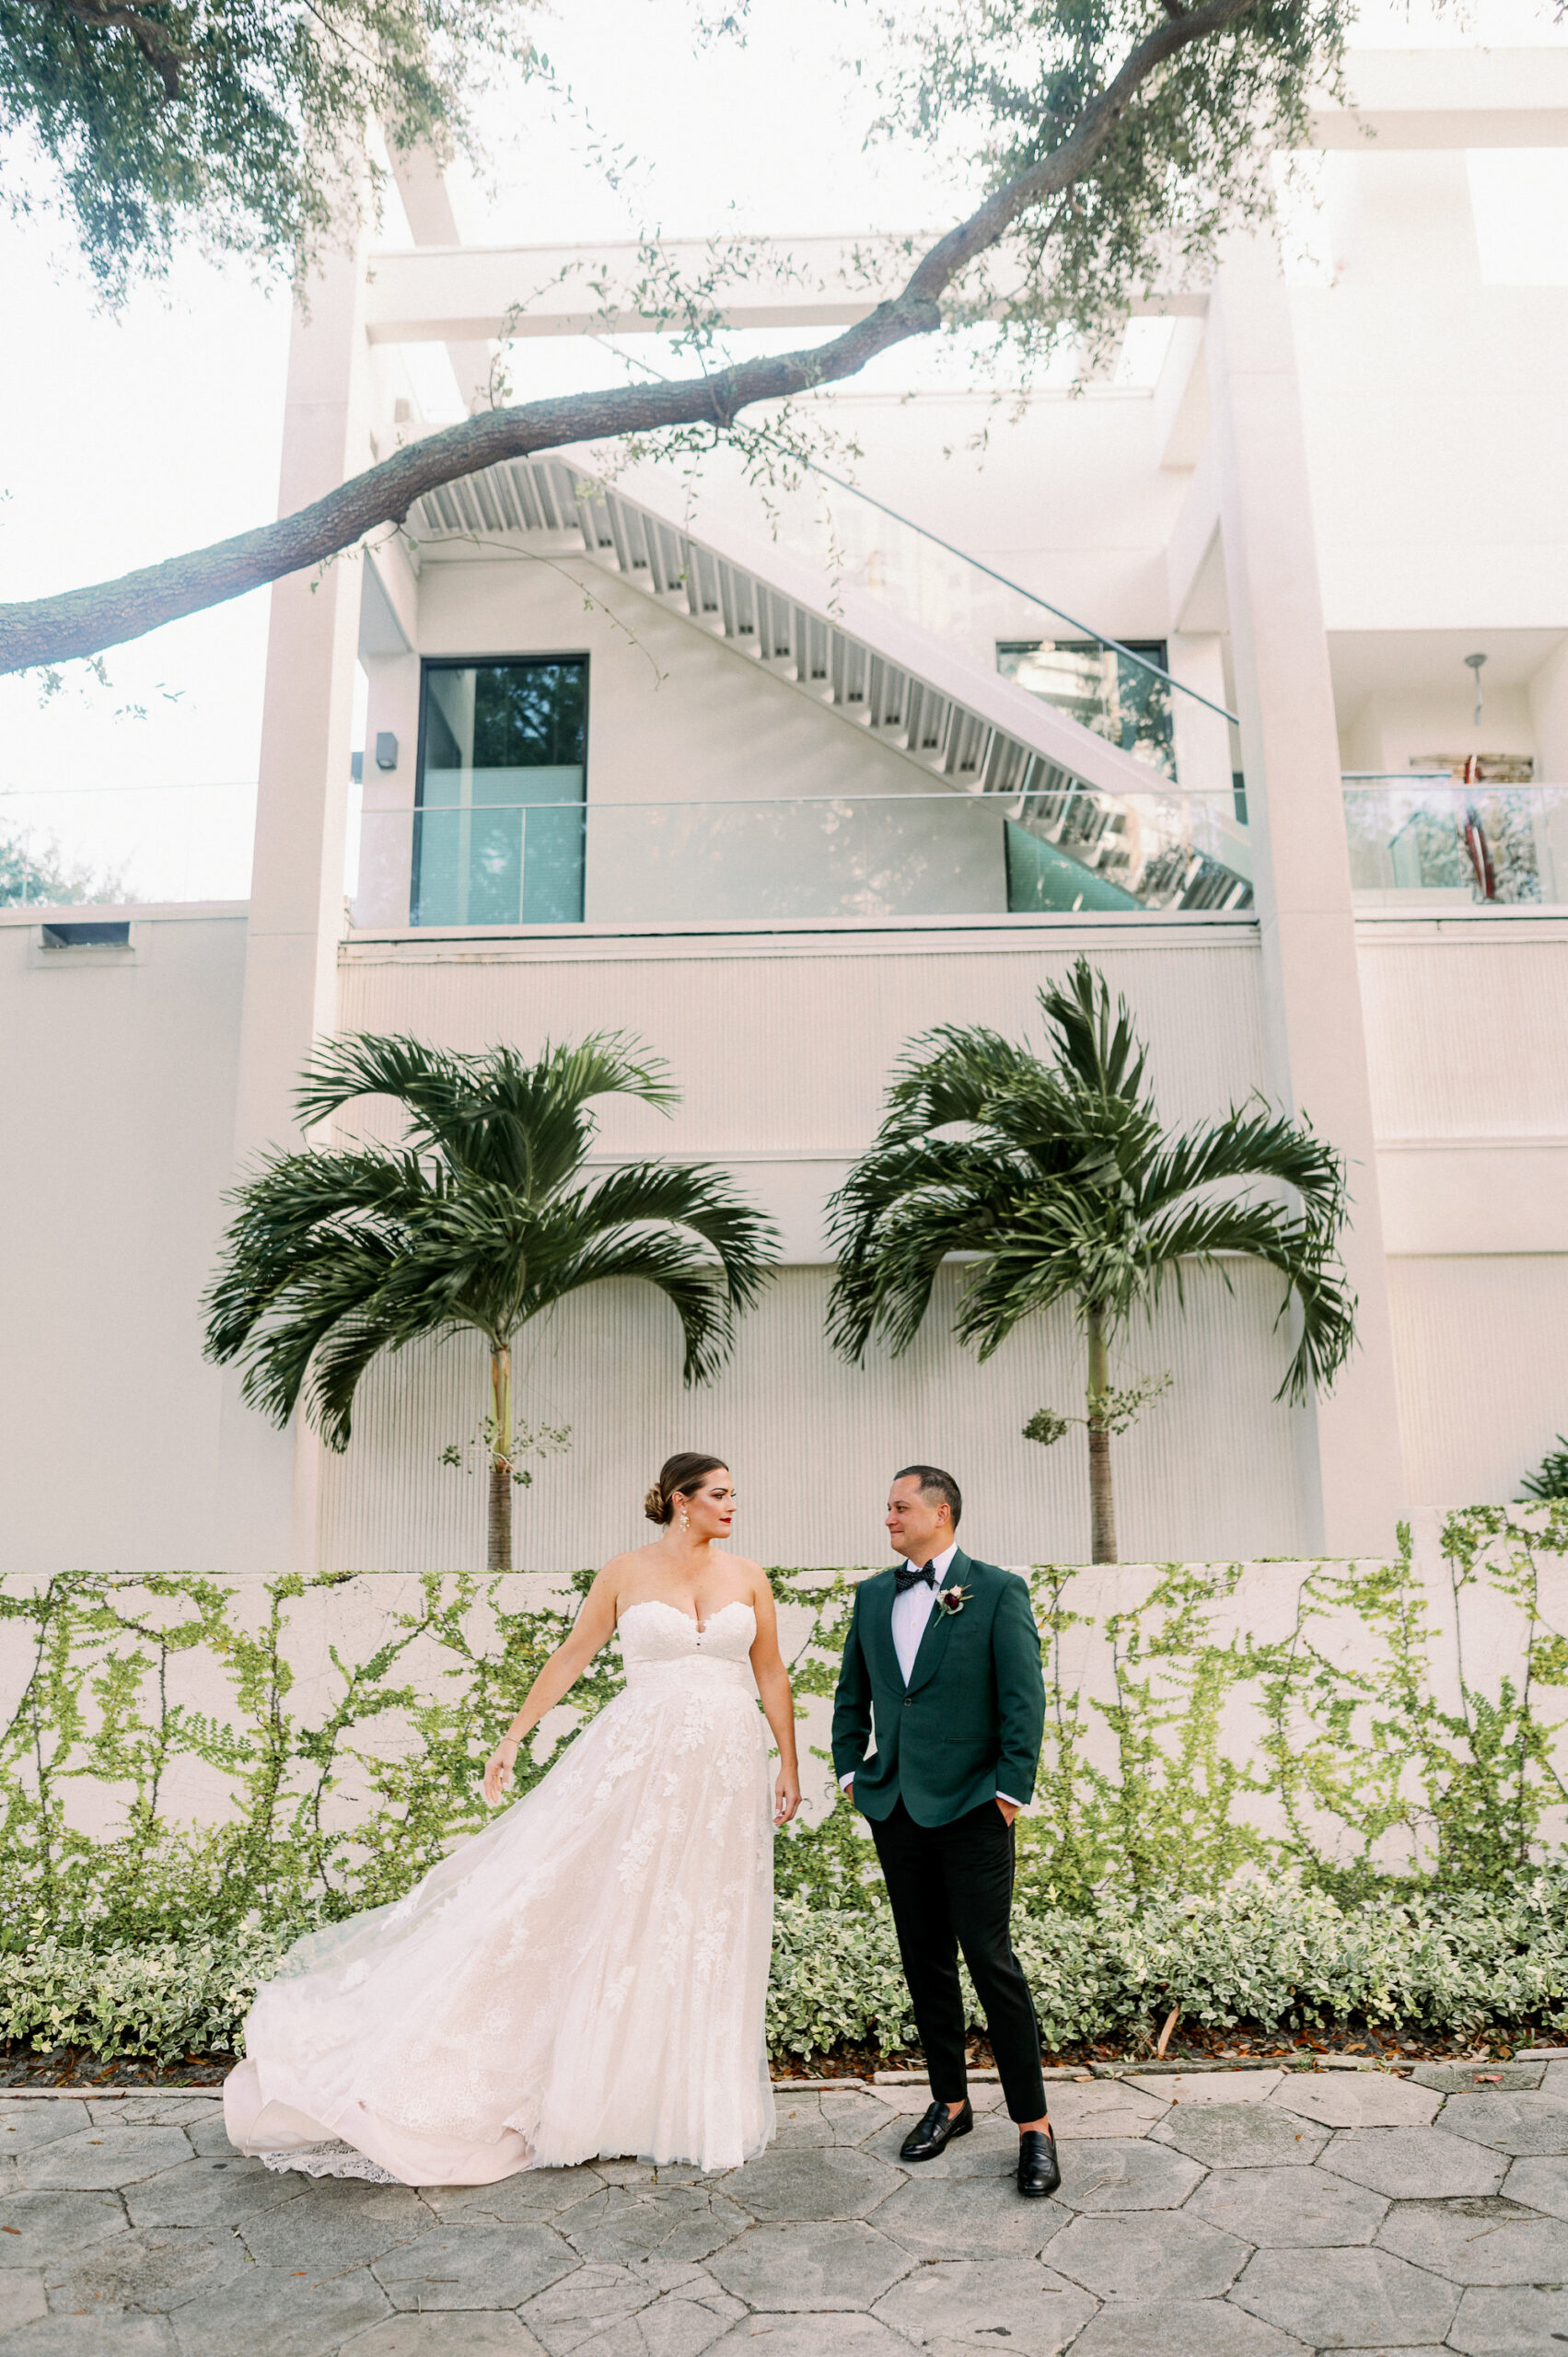 Bride and Groom Wedding Portrait | Downtown St. Pete Wedding Photographers Dewitt for Love Photography